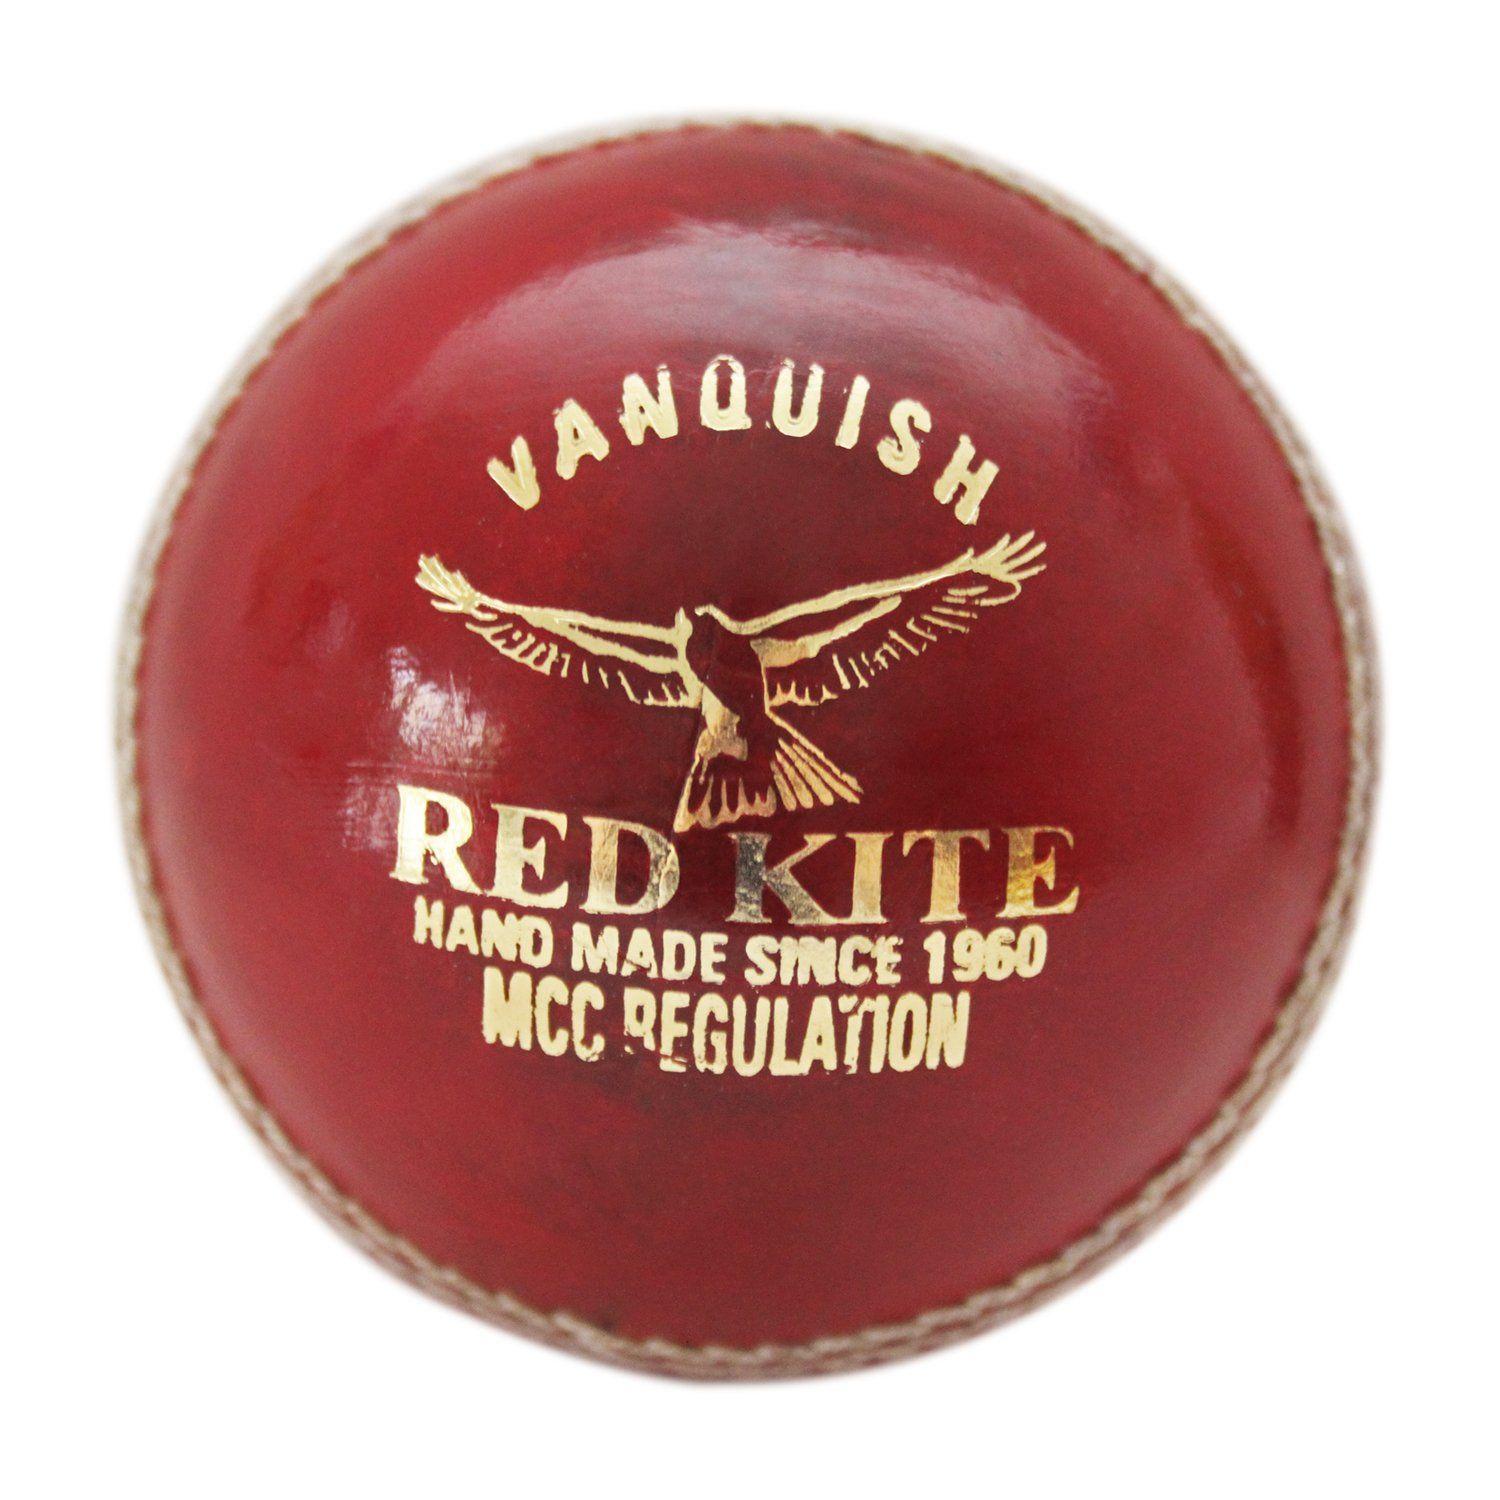 Red Hands On Ball Logo - Vanquish premium red leather cricket ball made from four